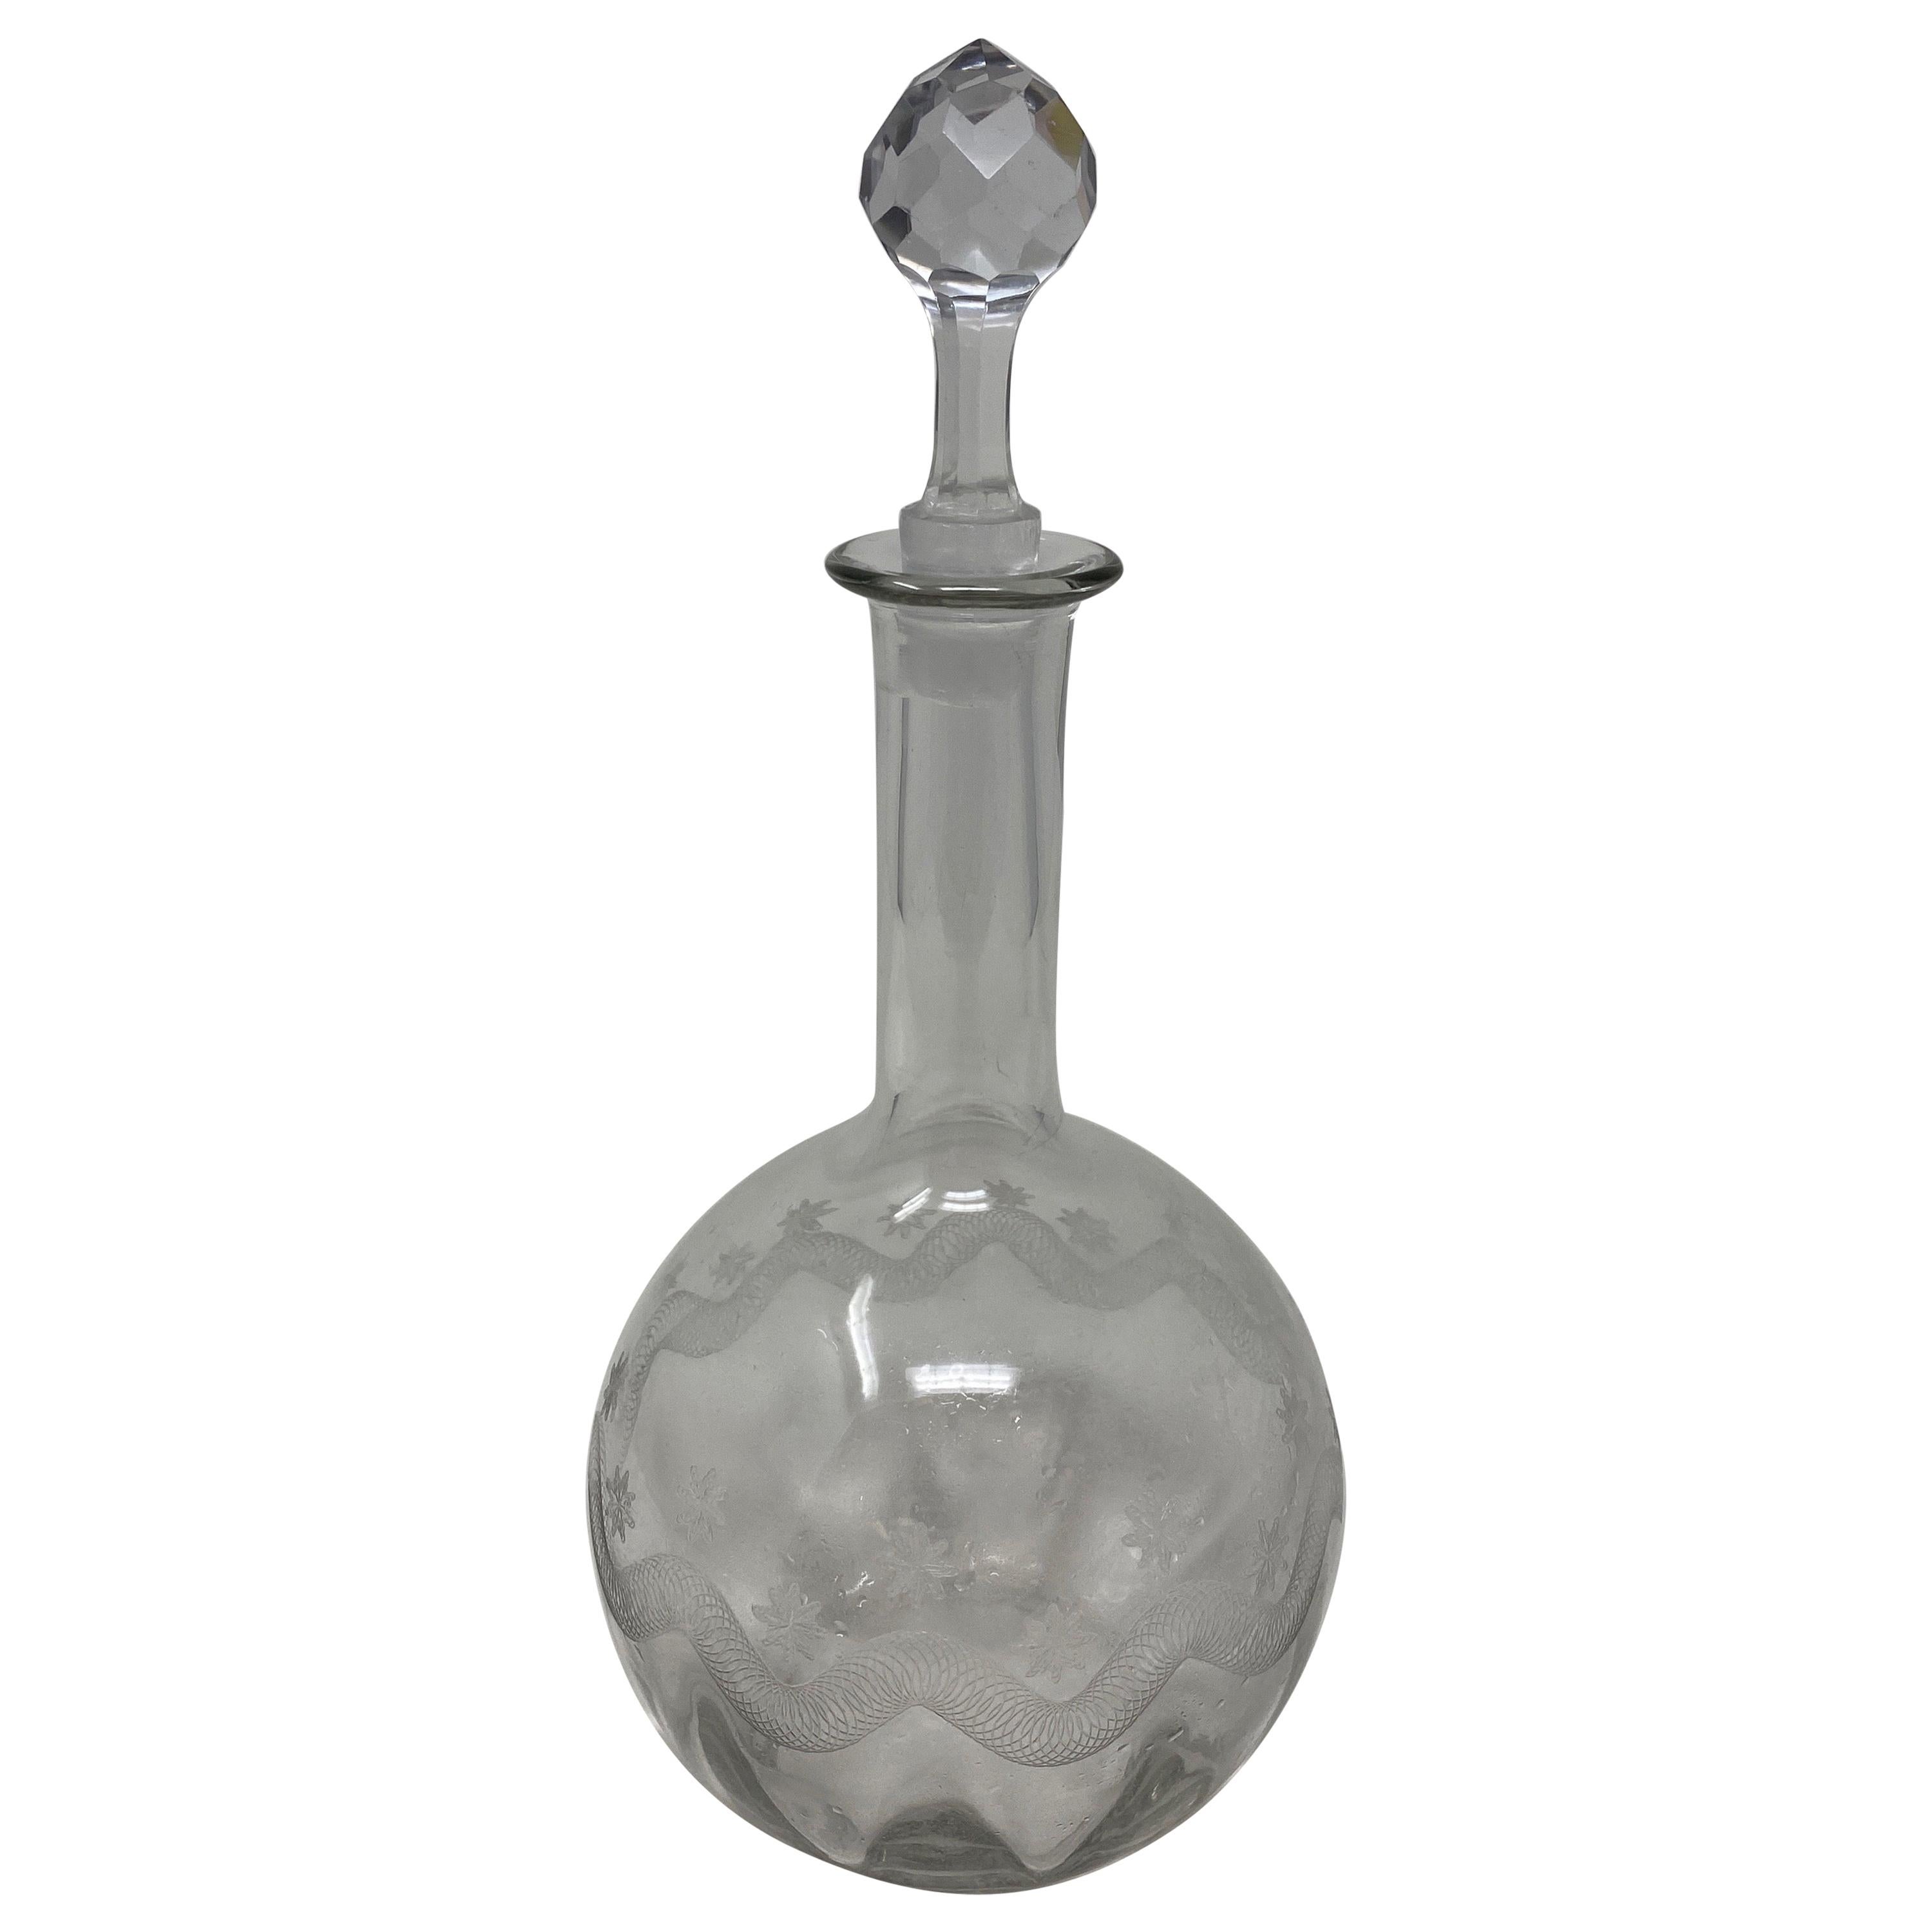 Antique French Decanter with Stopper